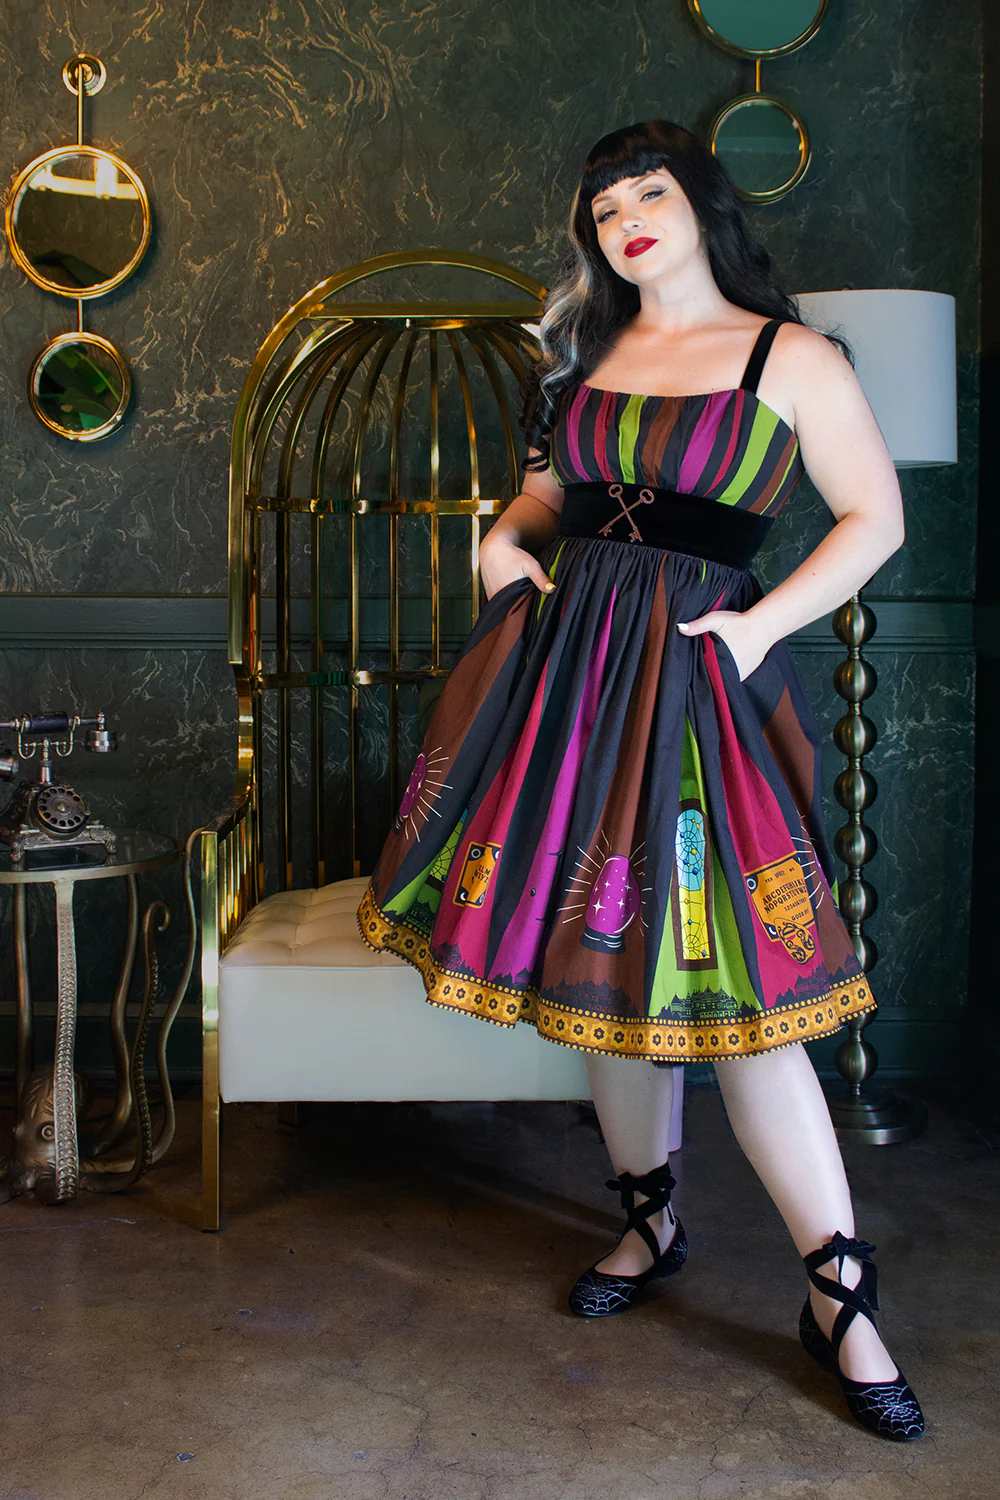 Winchester Mystery House® 13 Dress